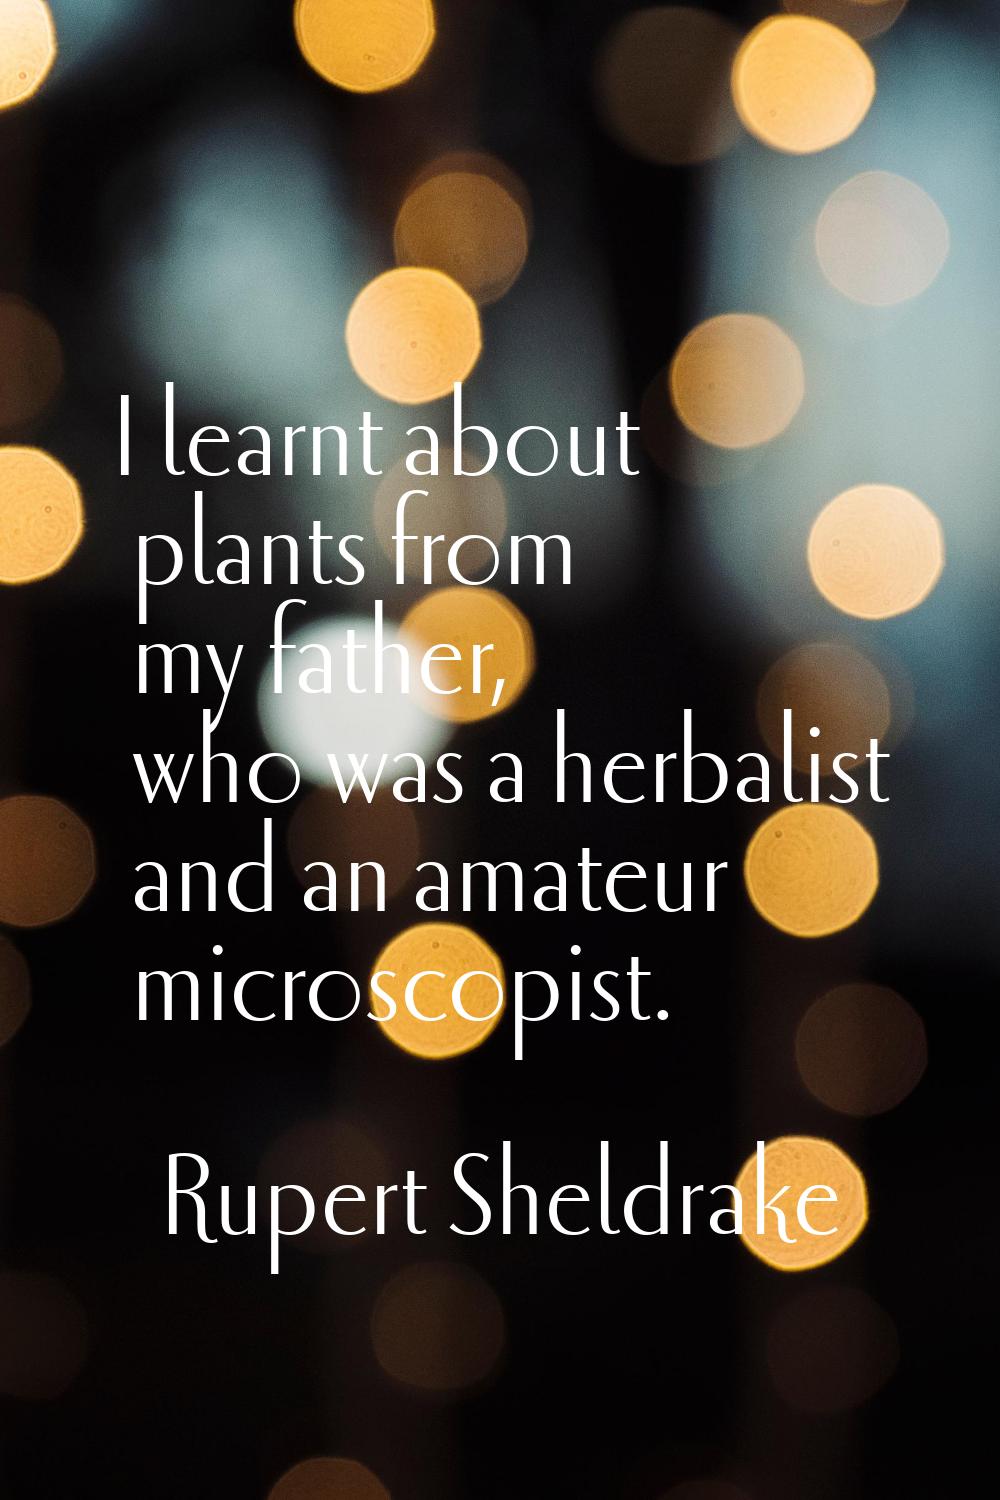 I learnt about plants from my father, who was a herbalist and an amateur microscopist.